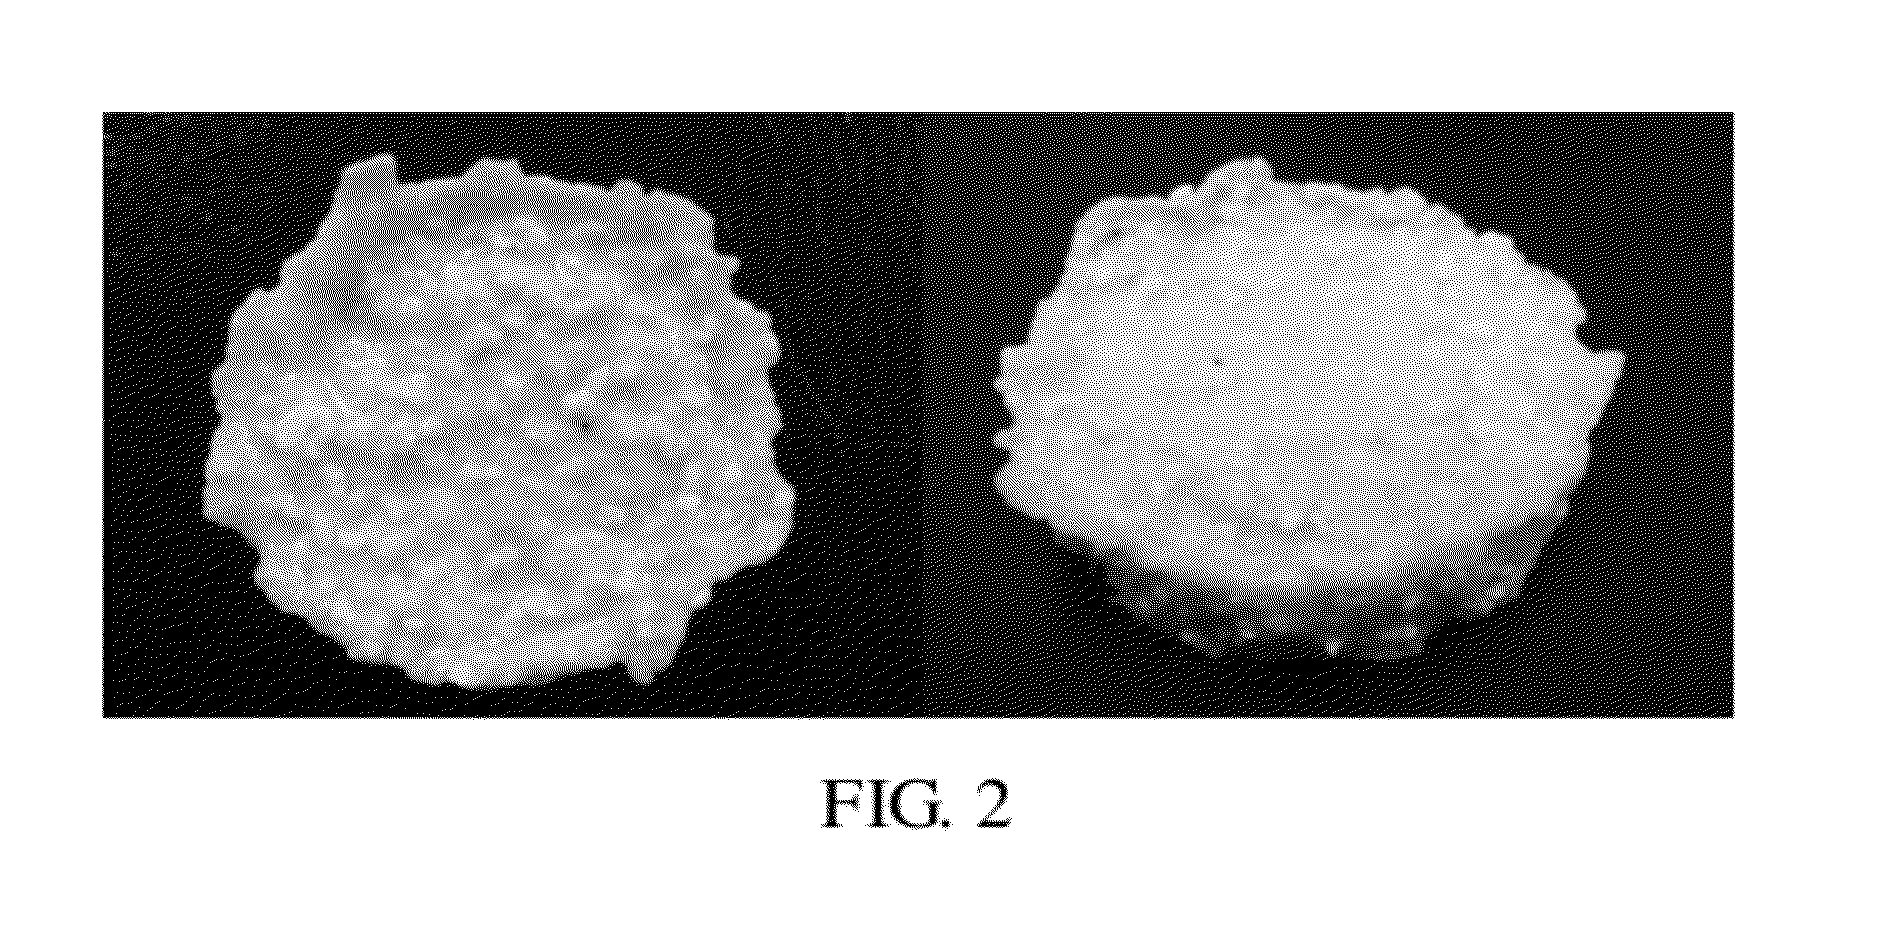 Mineralized Collagen/Bioceramic Composite and Manufacturing Method Thereof